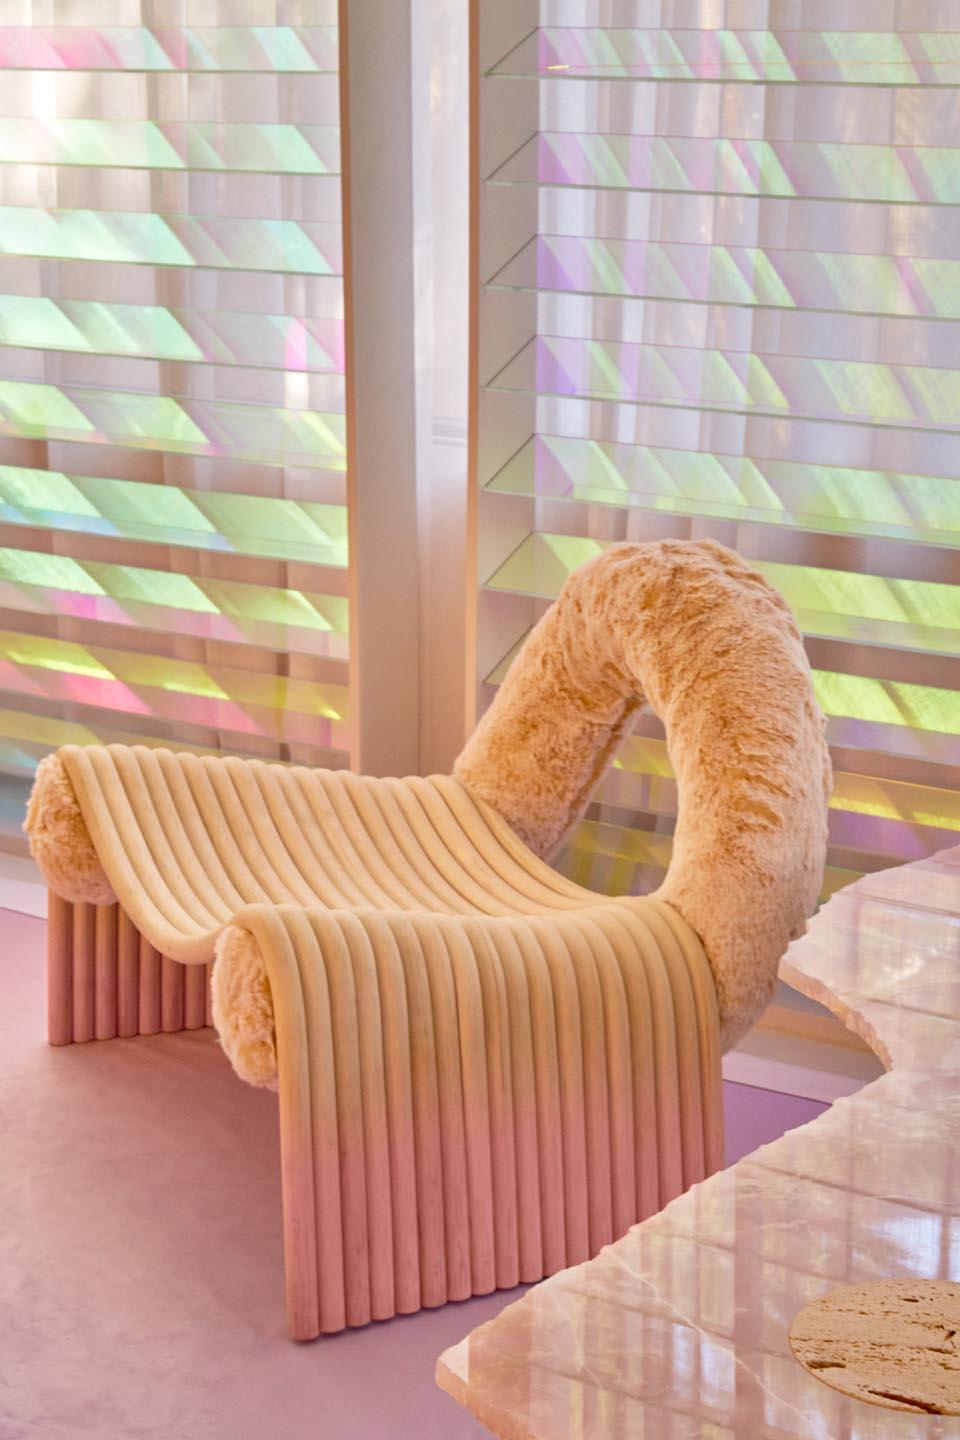 Mater Armchair by Patricia Bustos de la Torre
Dimensions: D 66 x W 82 x H 63 cm.
Materials: Wood and plush.

Mater - Latin for mother- is a curved rattan seat handcrafted by Valencian artisans and inspired in the 70’s. Mater is born out of caring